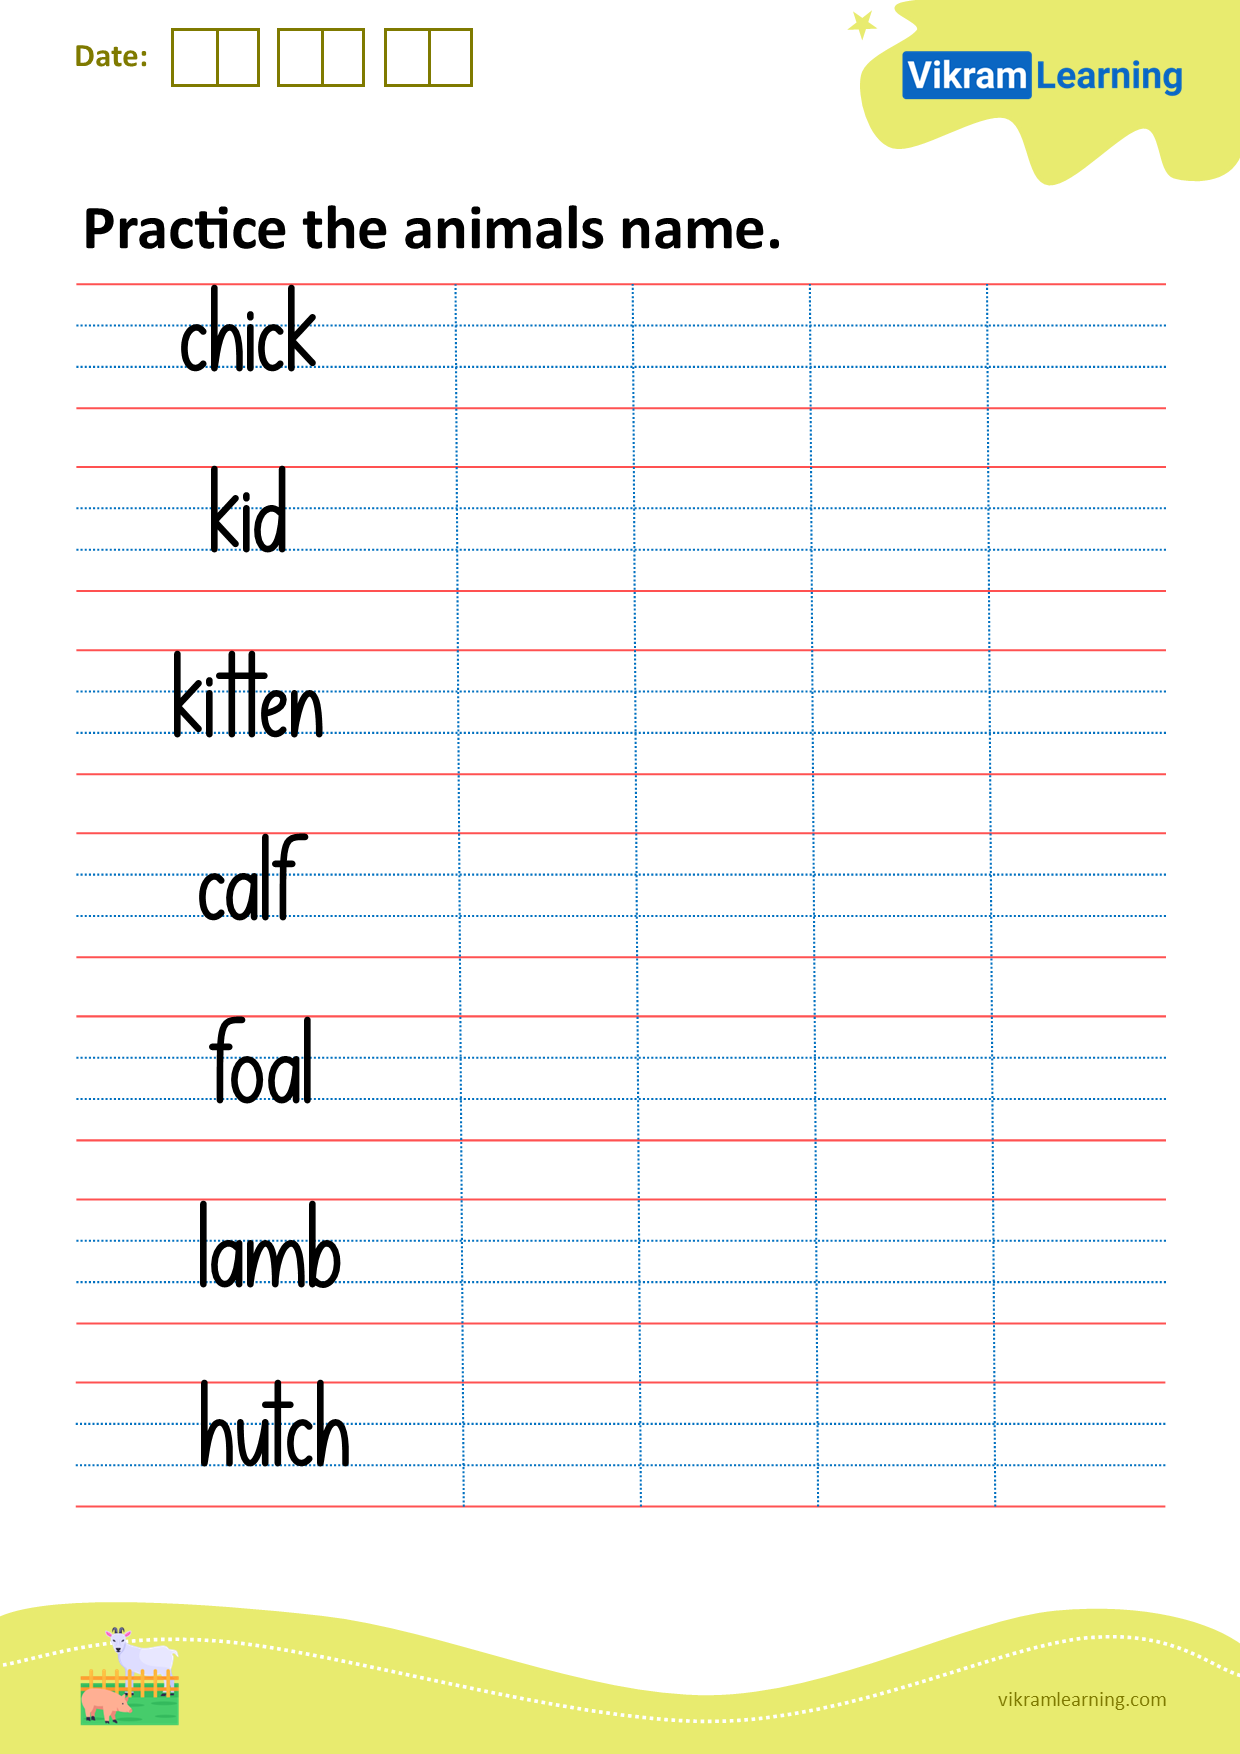 Download practice the animal's name. worksheets